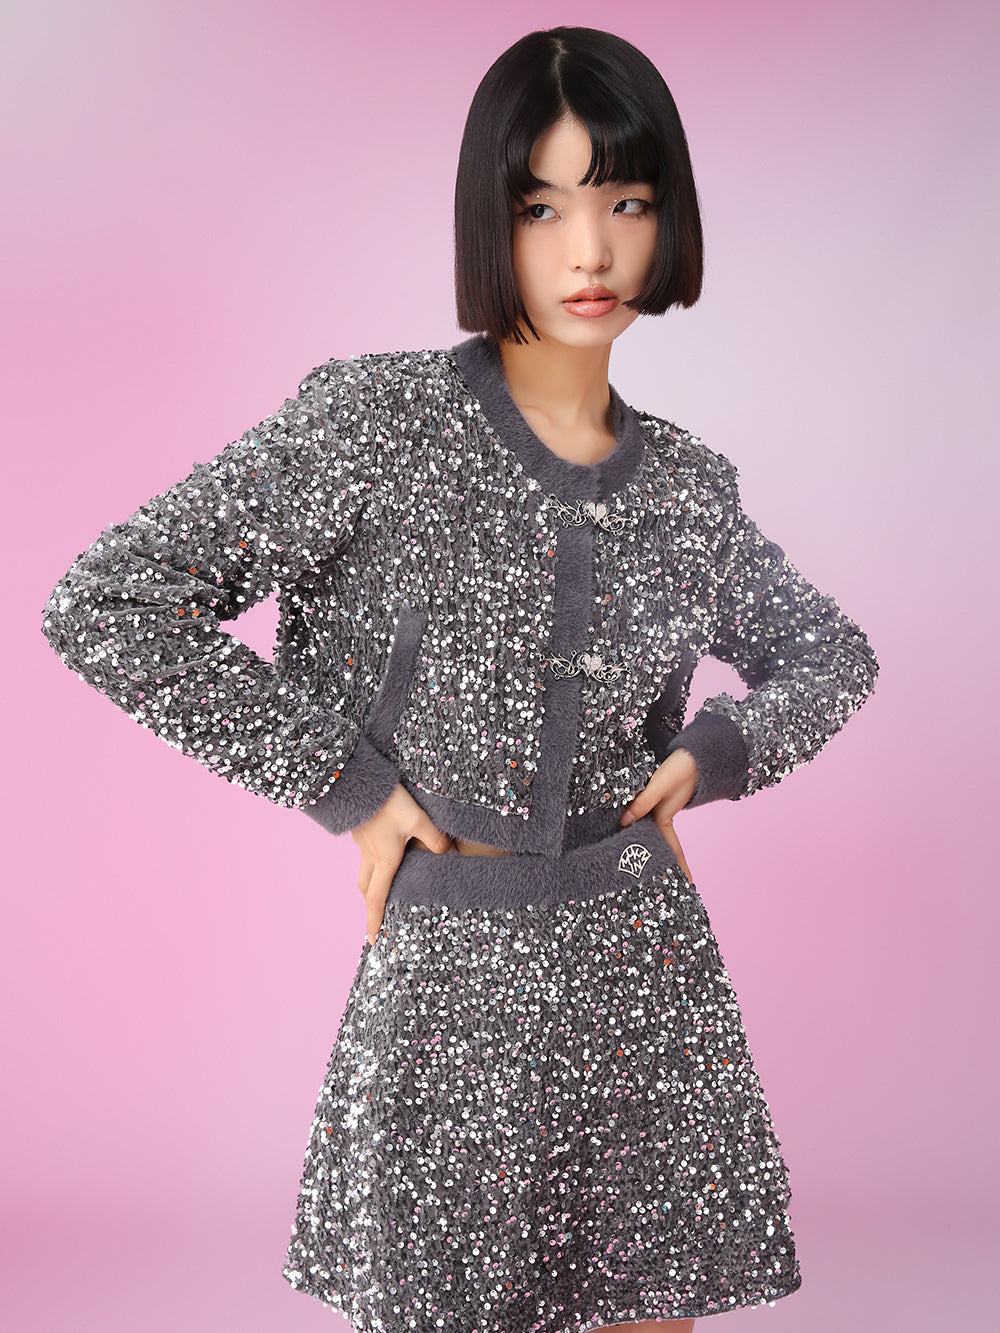 MUKZIN Y2K Style Attractive Sparkling Coat Skirts Charming Set